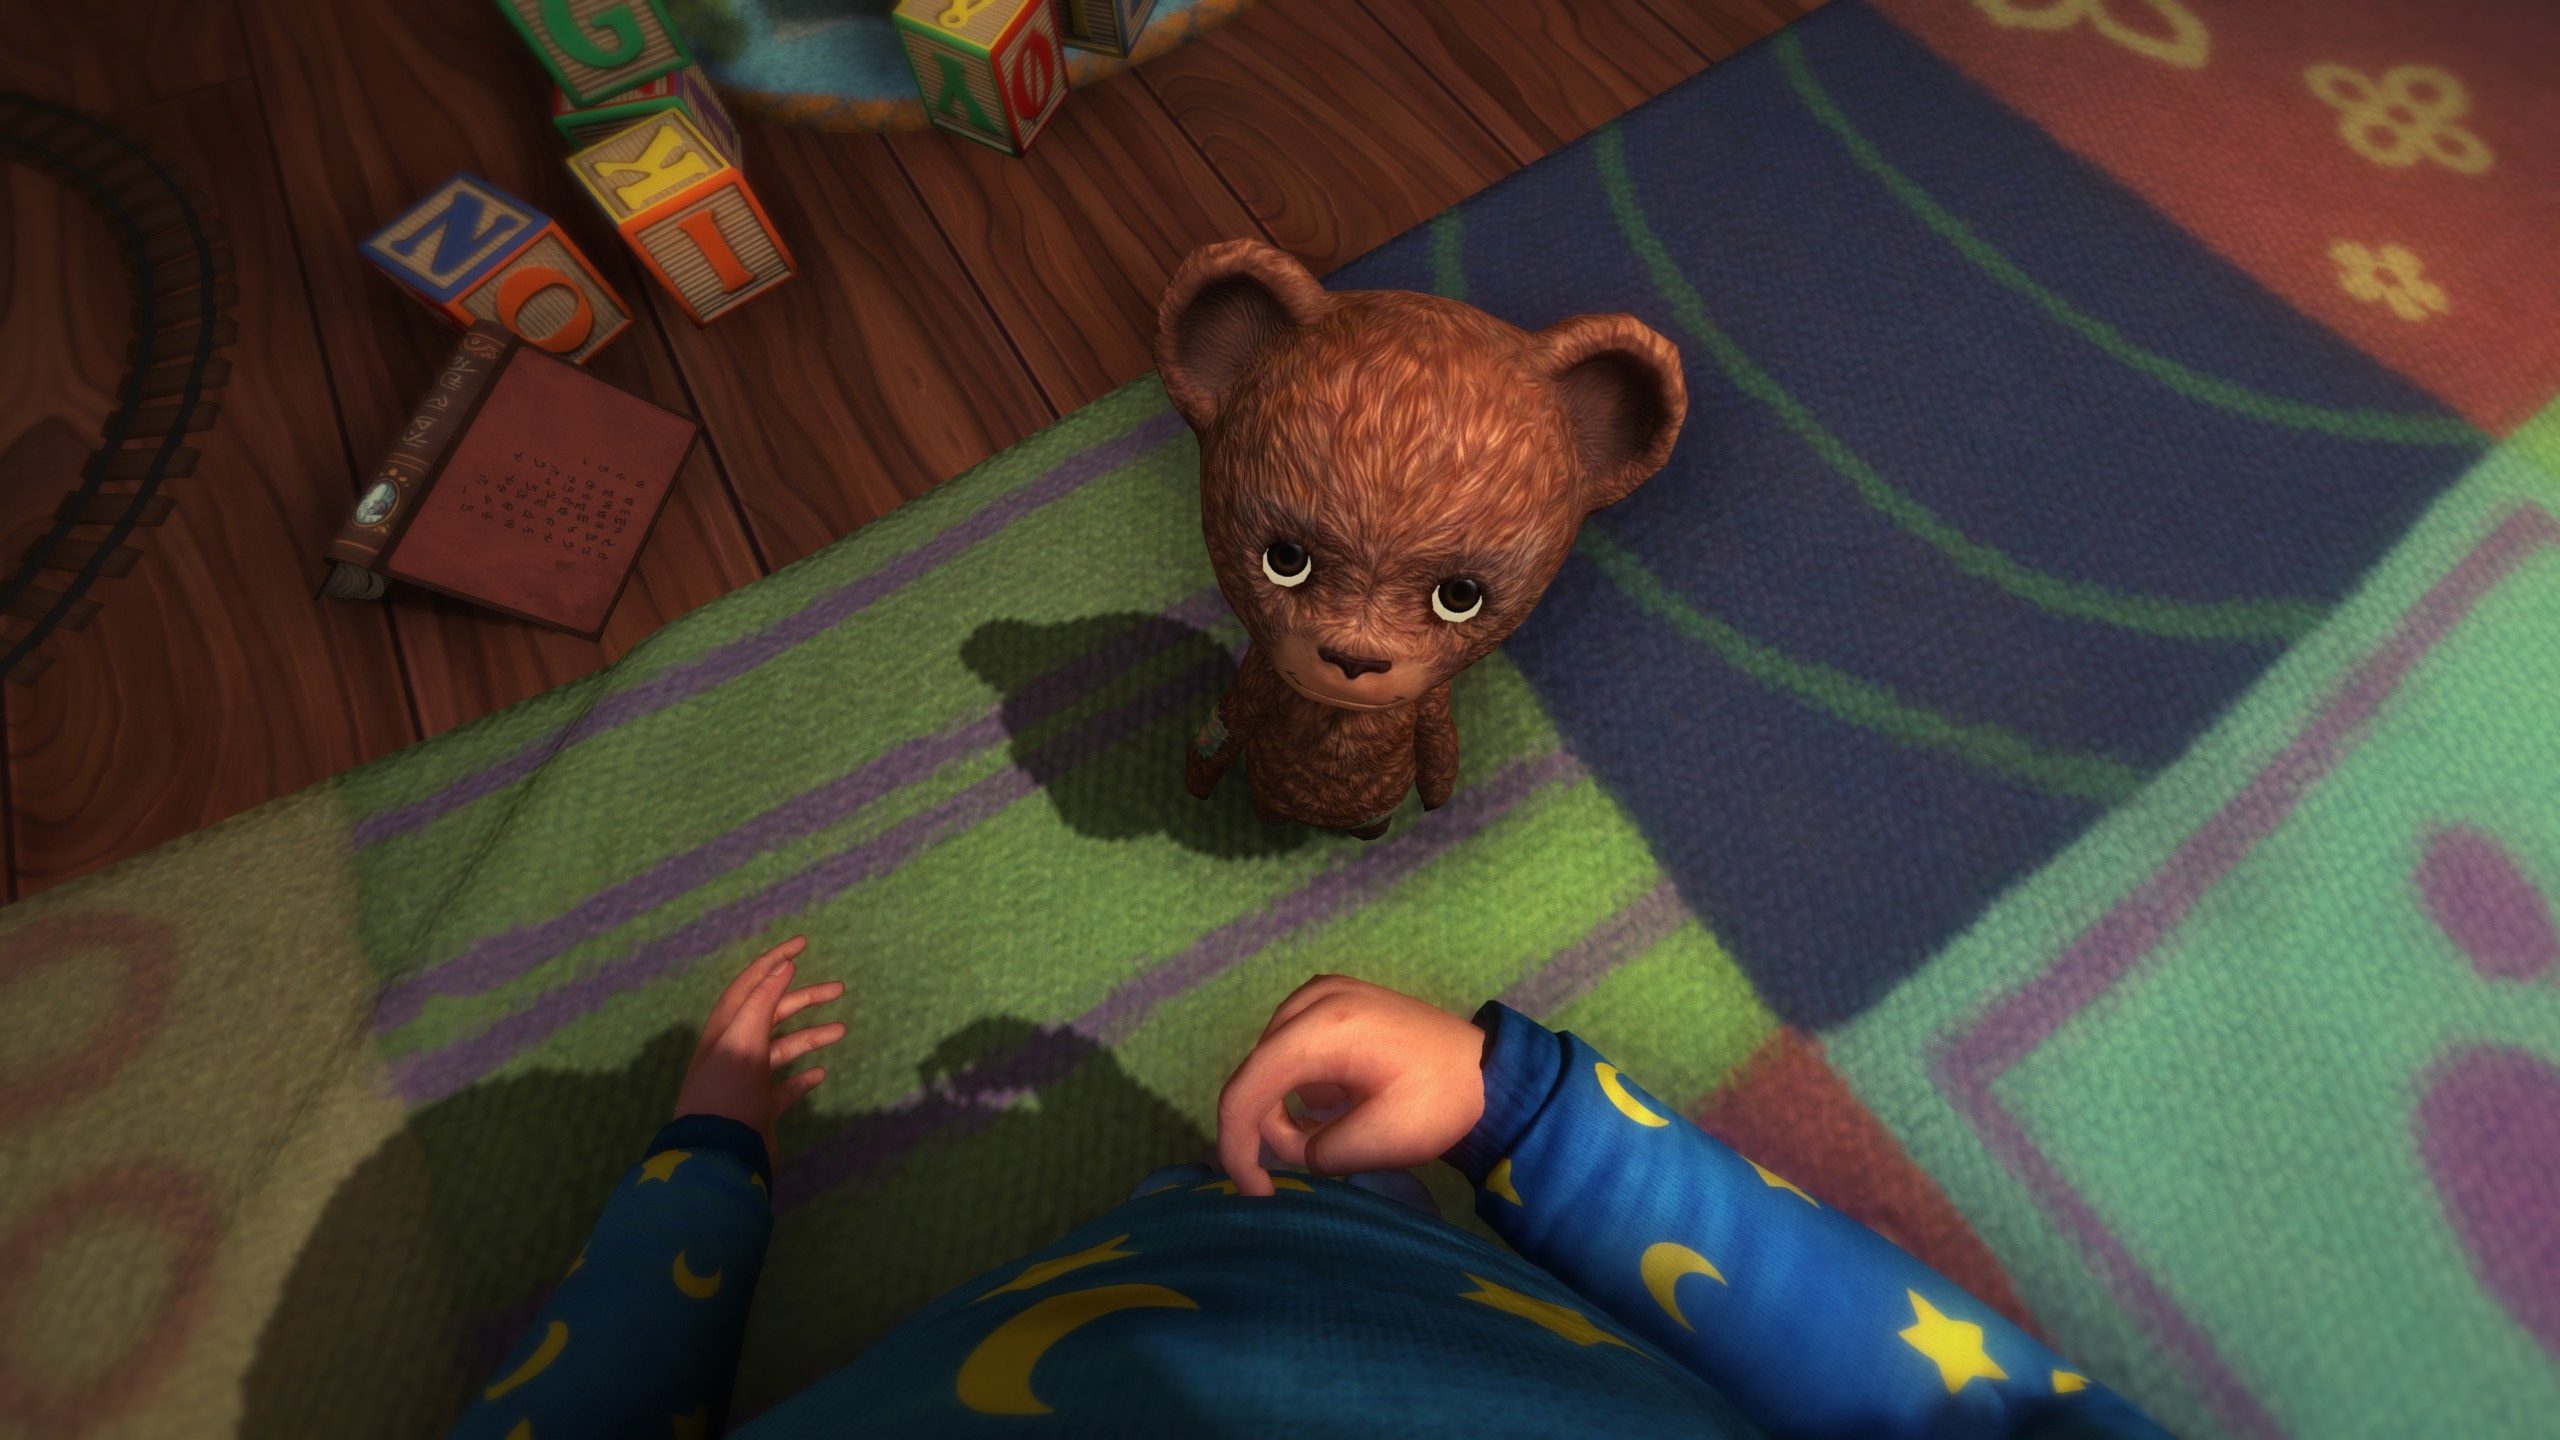 Among the Sleep is a horror game freebie on the Epic Games Store